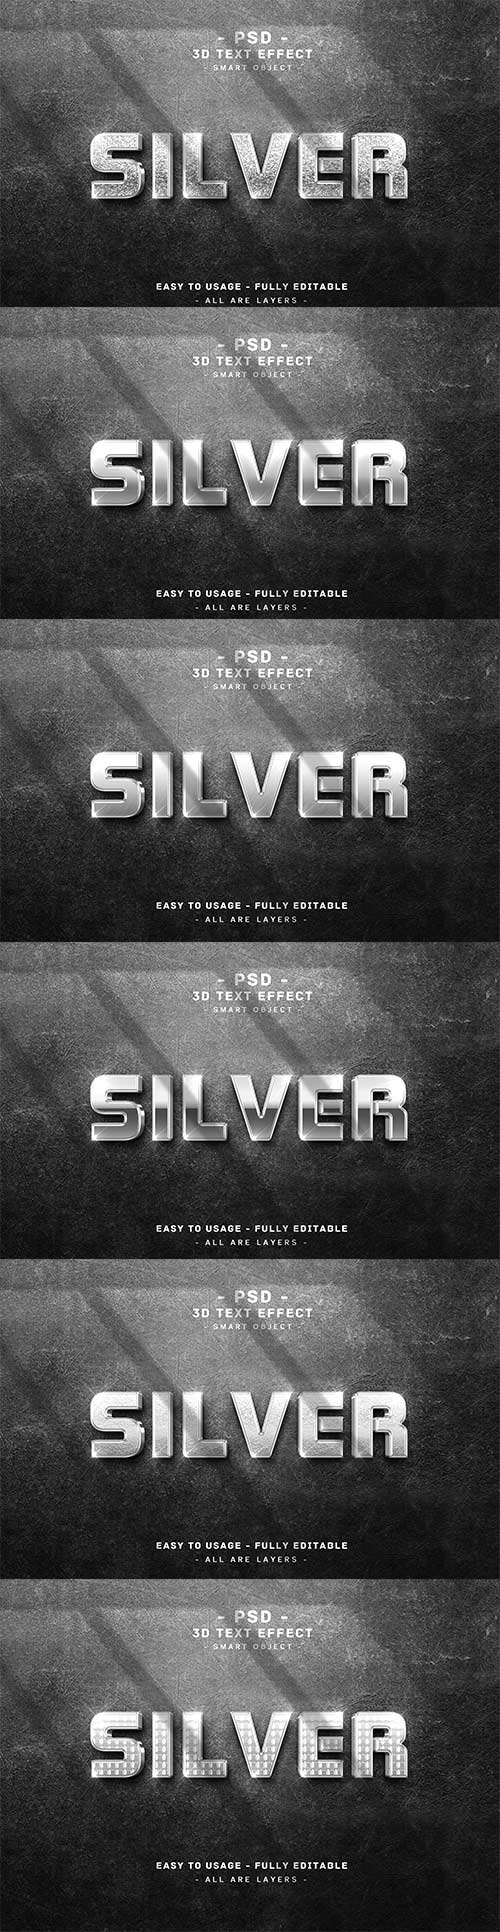 3d silver text style effect on wall premium psd